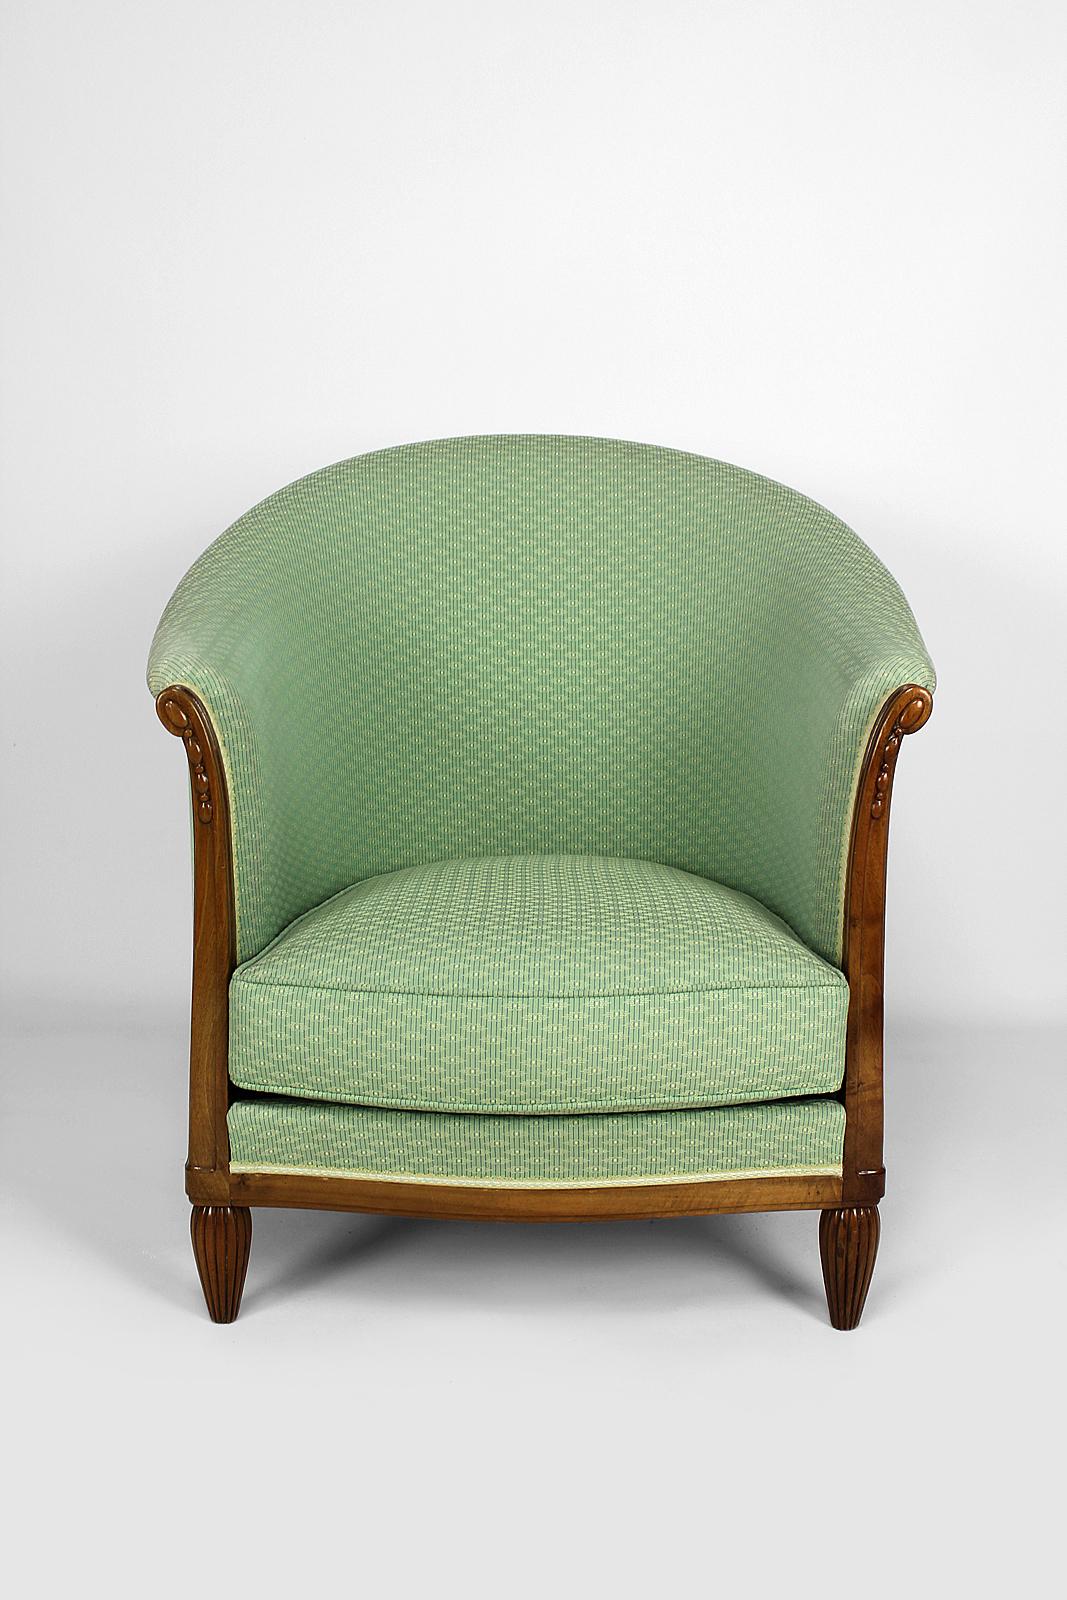 French Art Deco Armchair by Ateliers Gauthier-Poinsignon in walnut, circa 1920-1930 For Sale